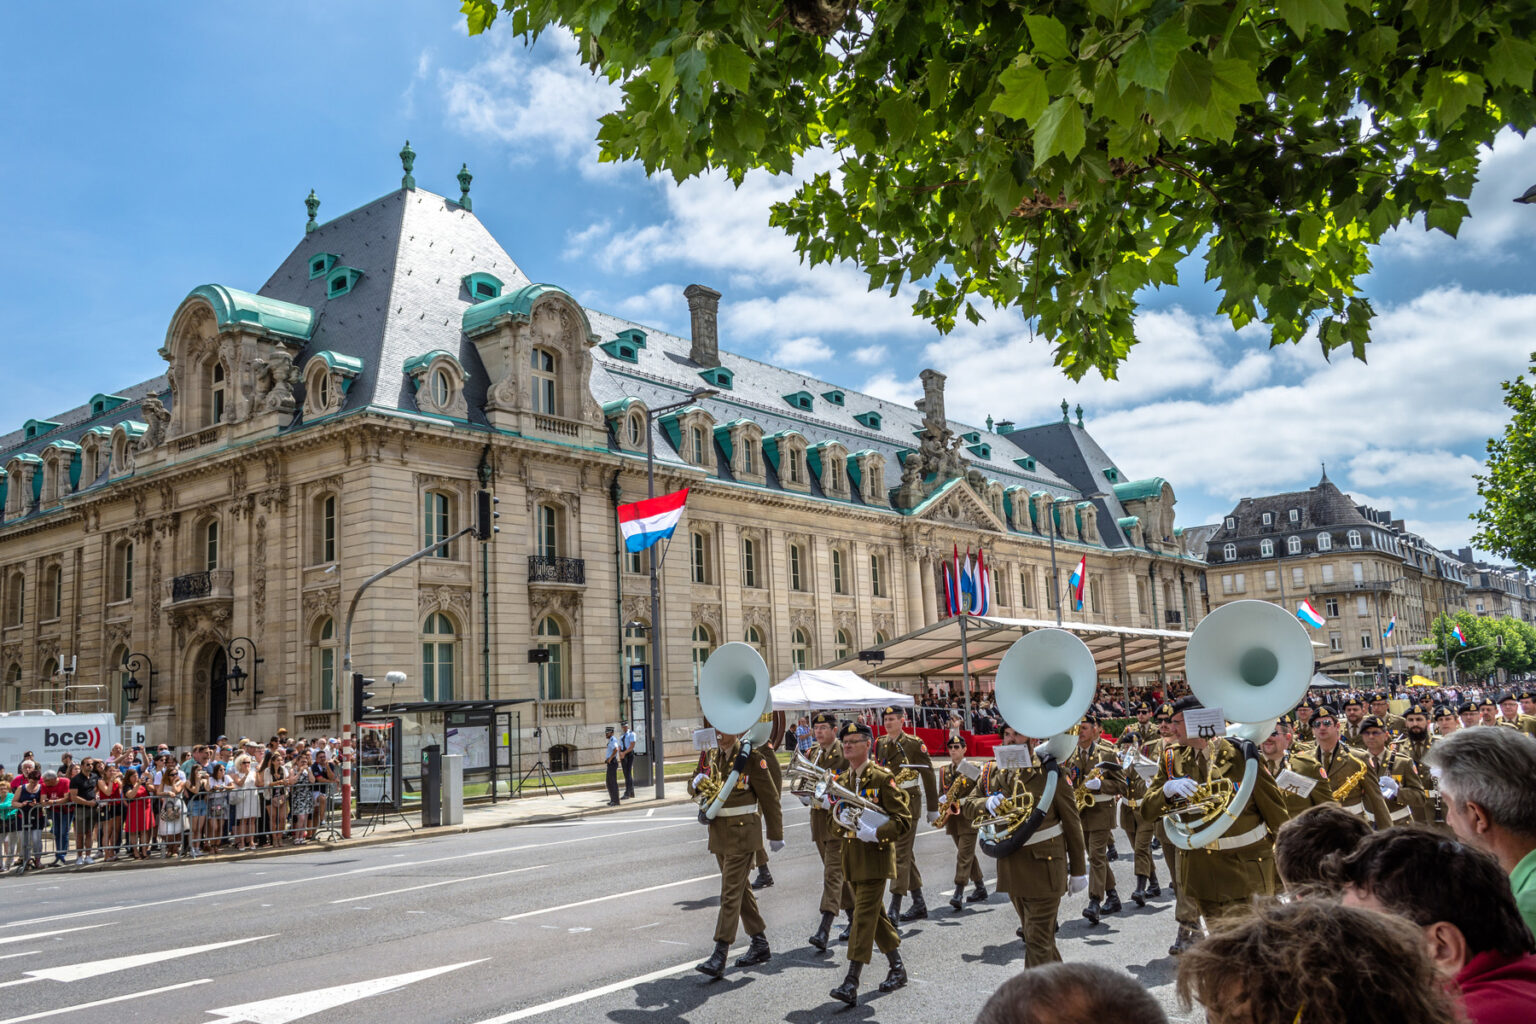 An orchestra parades through the streets to celebrate Luxembourg's National Day